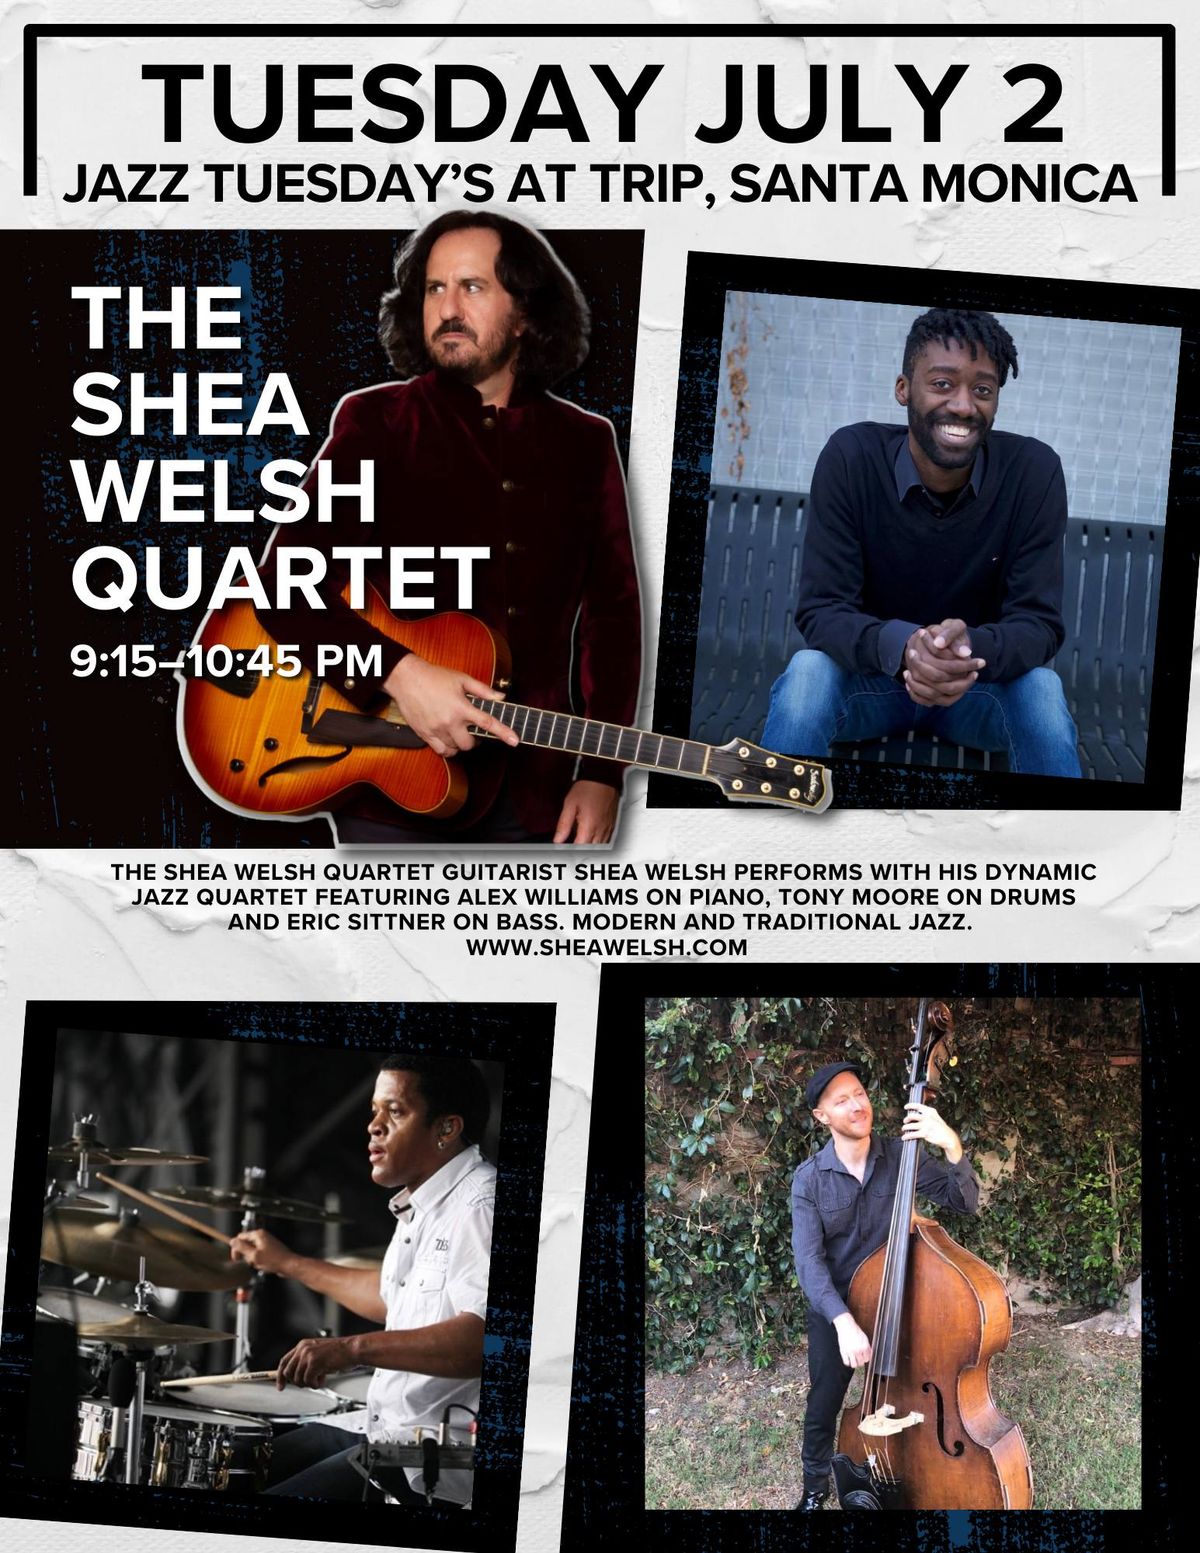 Jazz Tuesday's at Trip with The Shea Welsh Quartet